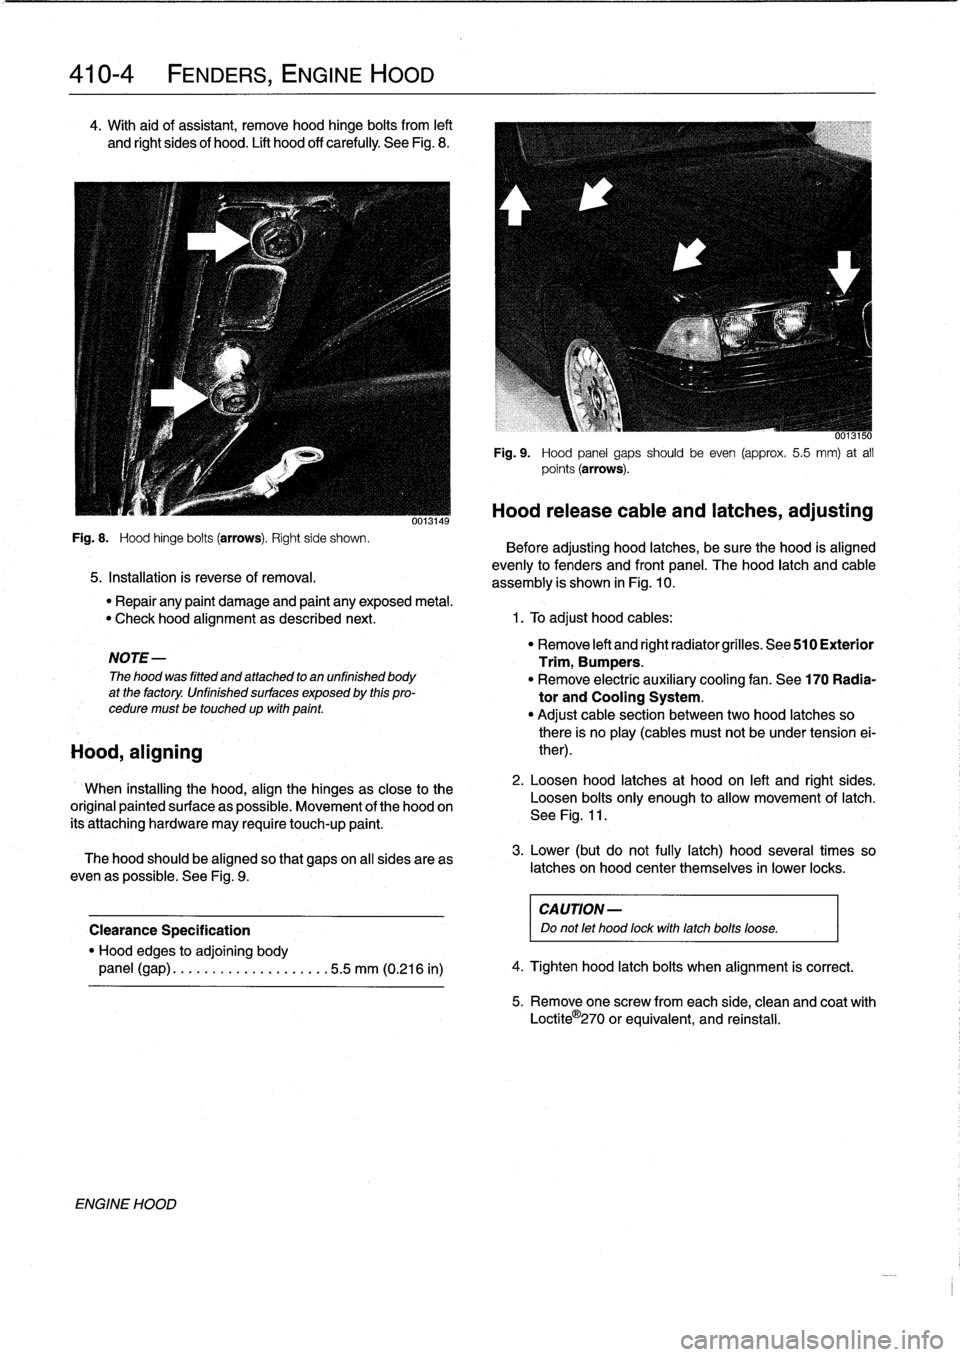 BMW 318i 1998 E36 Workshop Manual 
410-4

	

FENDERS,
ENGINE
HOOD

4
.
With
aid
of
assistant,
remove
hood
hinge
bolts
from
left

and
Rght
sides
of
hood
.
Lift
hood
off
carefully
See
Fig
.
8
.

Fig
.
8
.

	

Hood
hinge
bolts
(arrows)
.